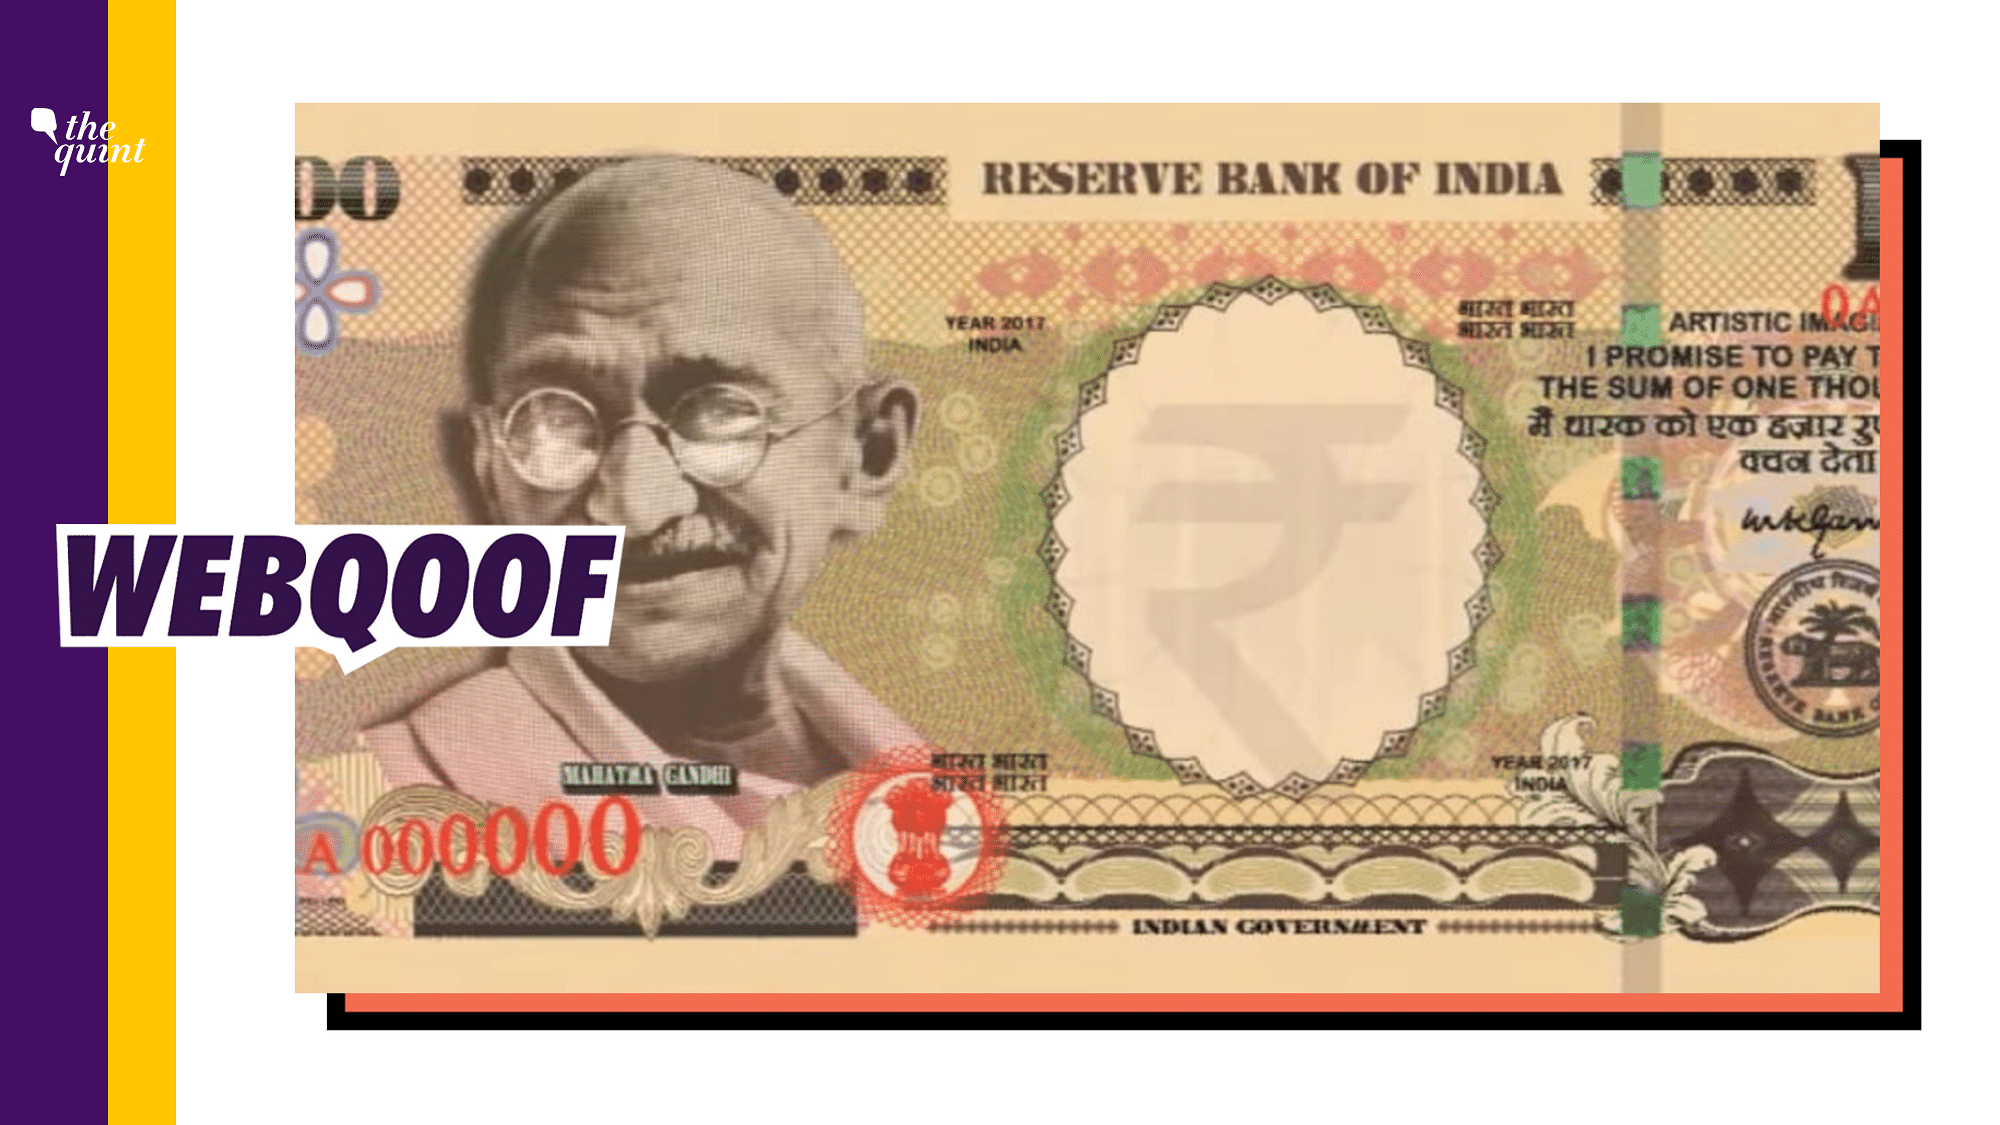 An image on social media falsely claimed that it is the new Rs 1,000 rupee note.